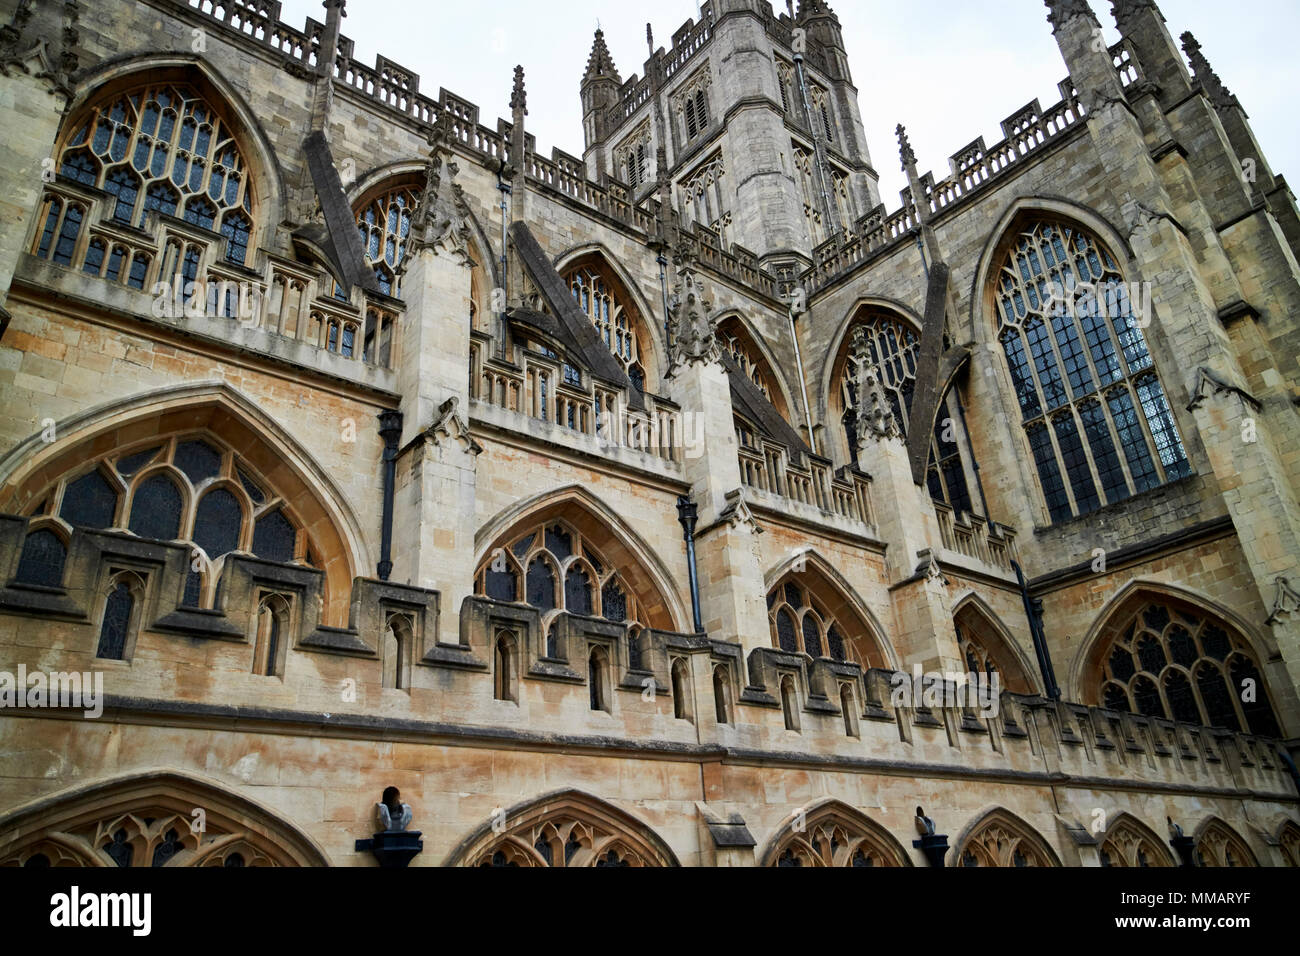 side view looking up at flying buttresses, battlements, pinnacles and parapets of gothic bath abbey Bath England UK Stock Photo